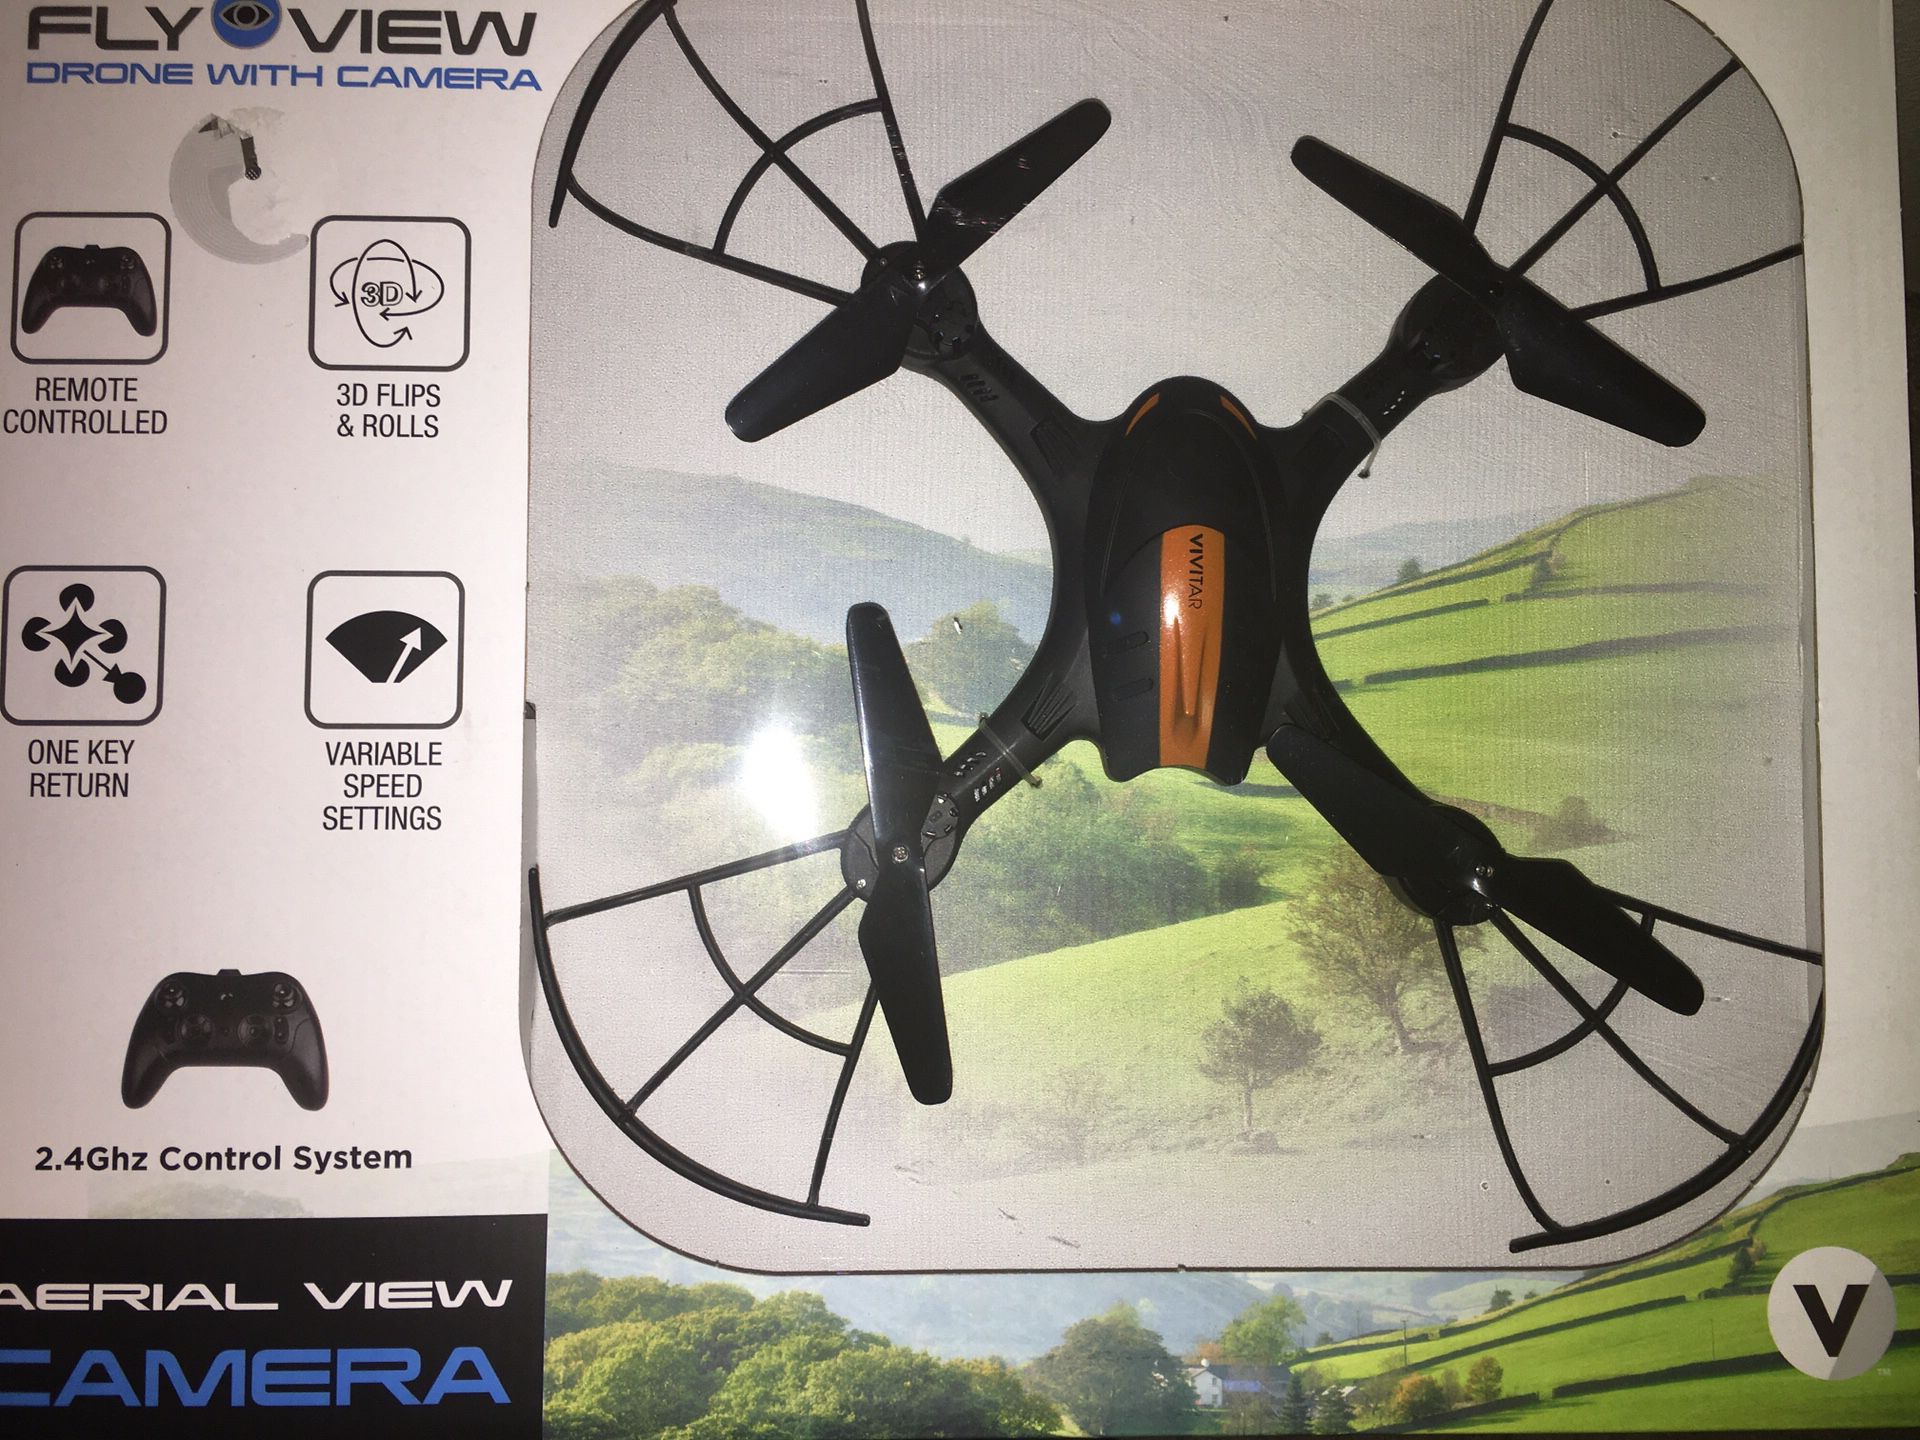 Camera Drone Aerial View Remote Control 3D Flips/Flops 1 Turn Key Return Variable Speed Settings Brand New Sealed Package 